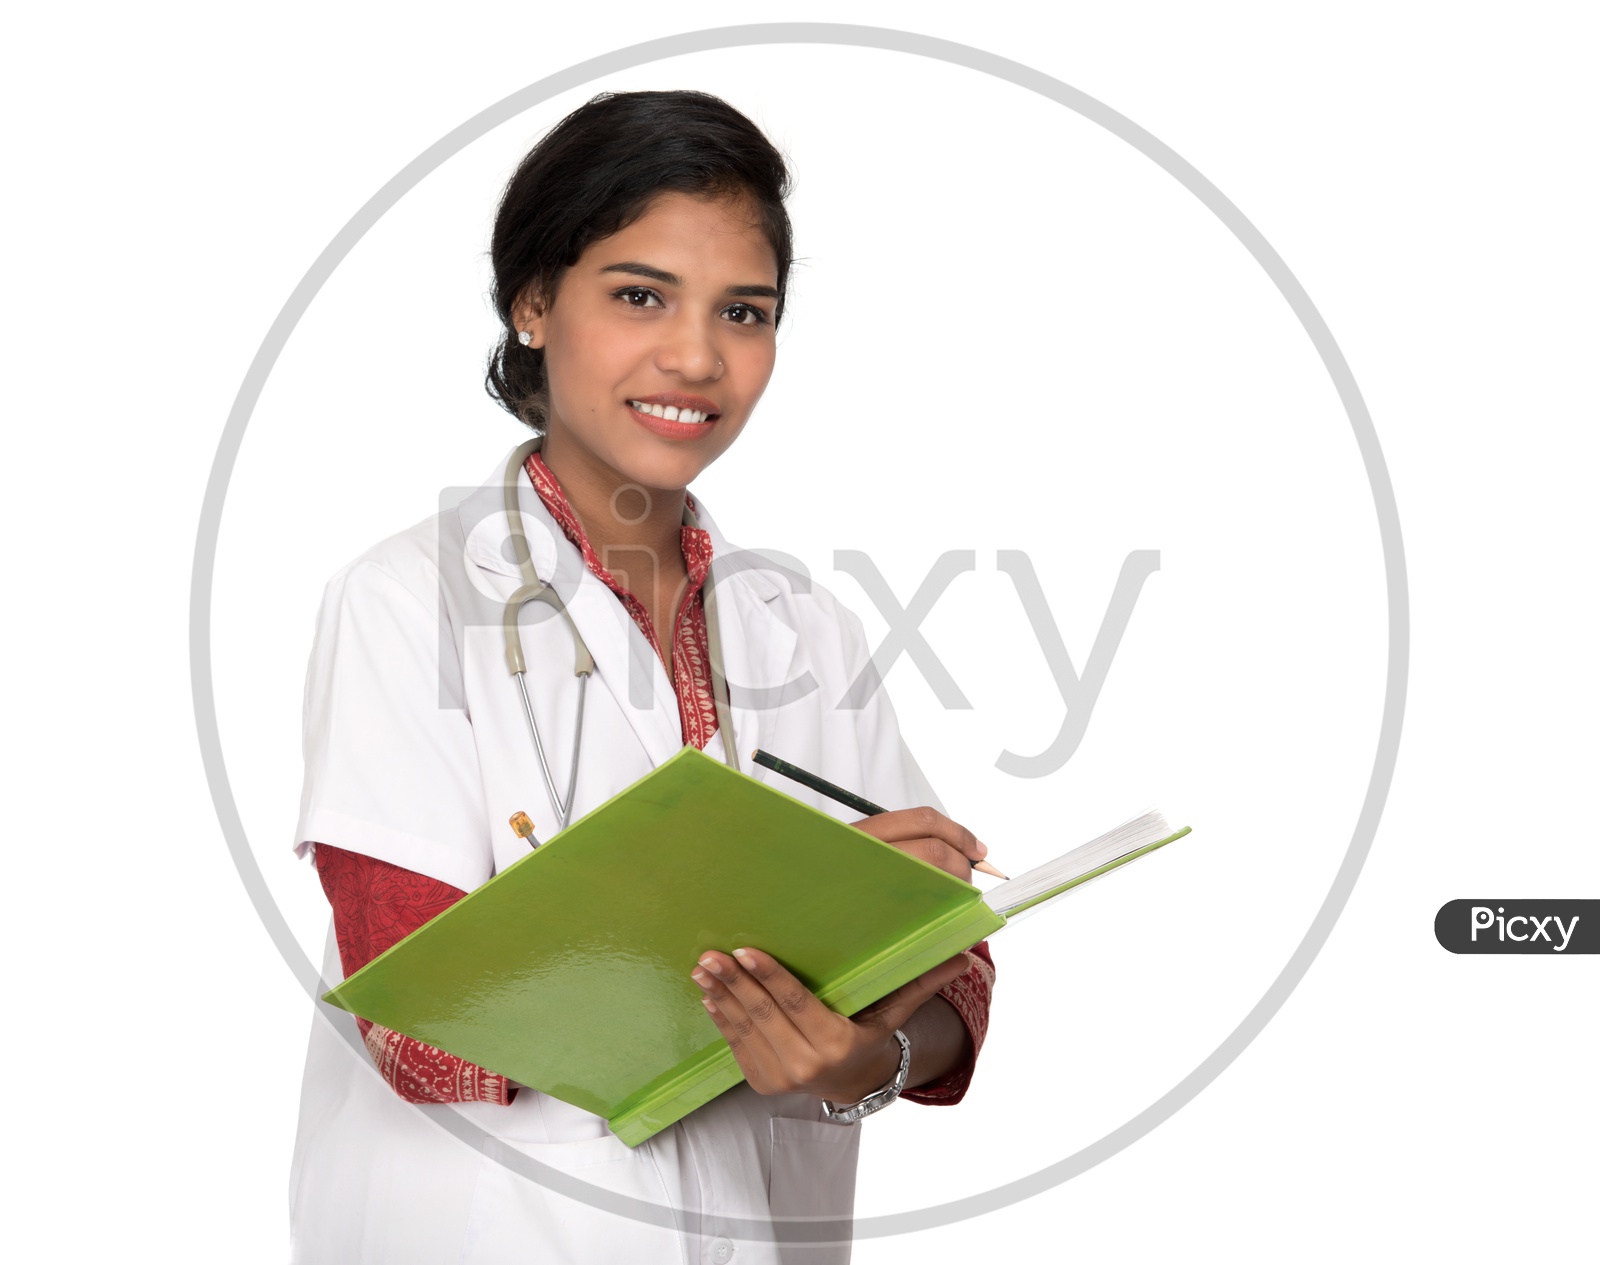 Young Lady Doctor With Stethoscope Over Neck And Writing In Book  On an Isolated White Background